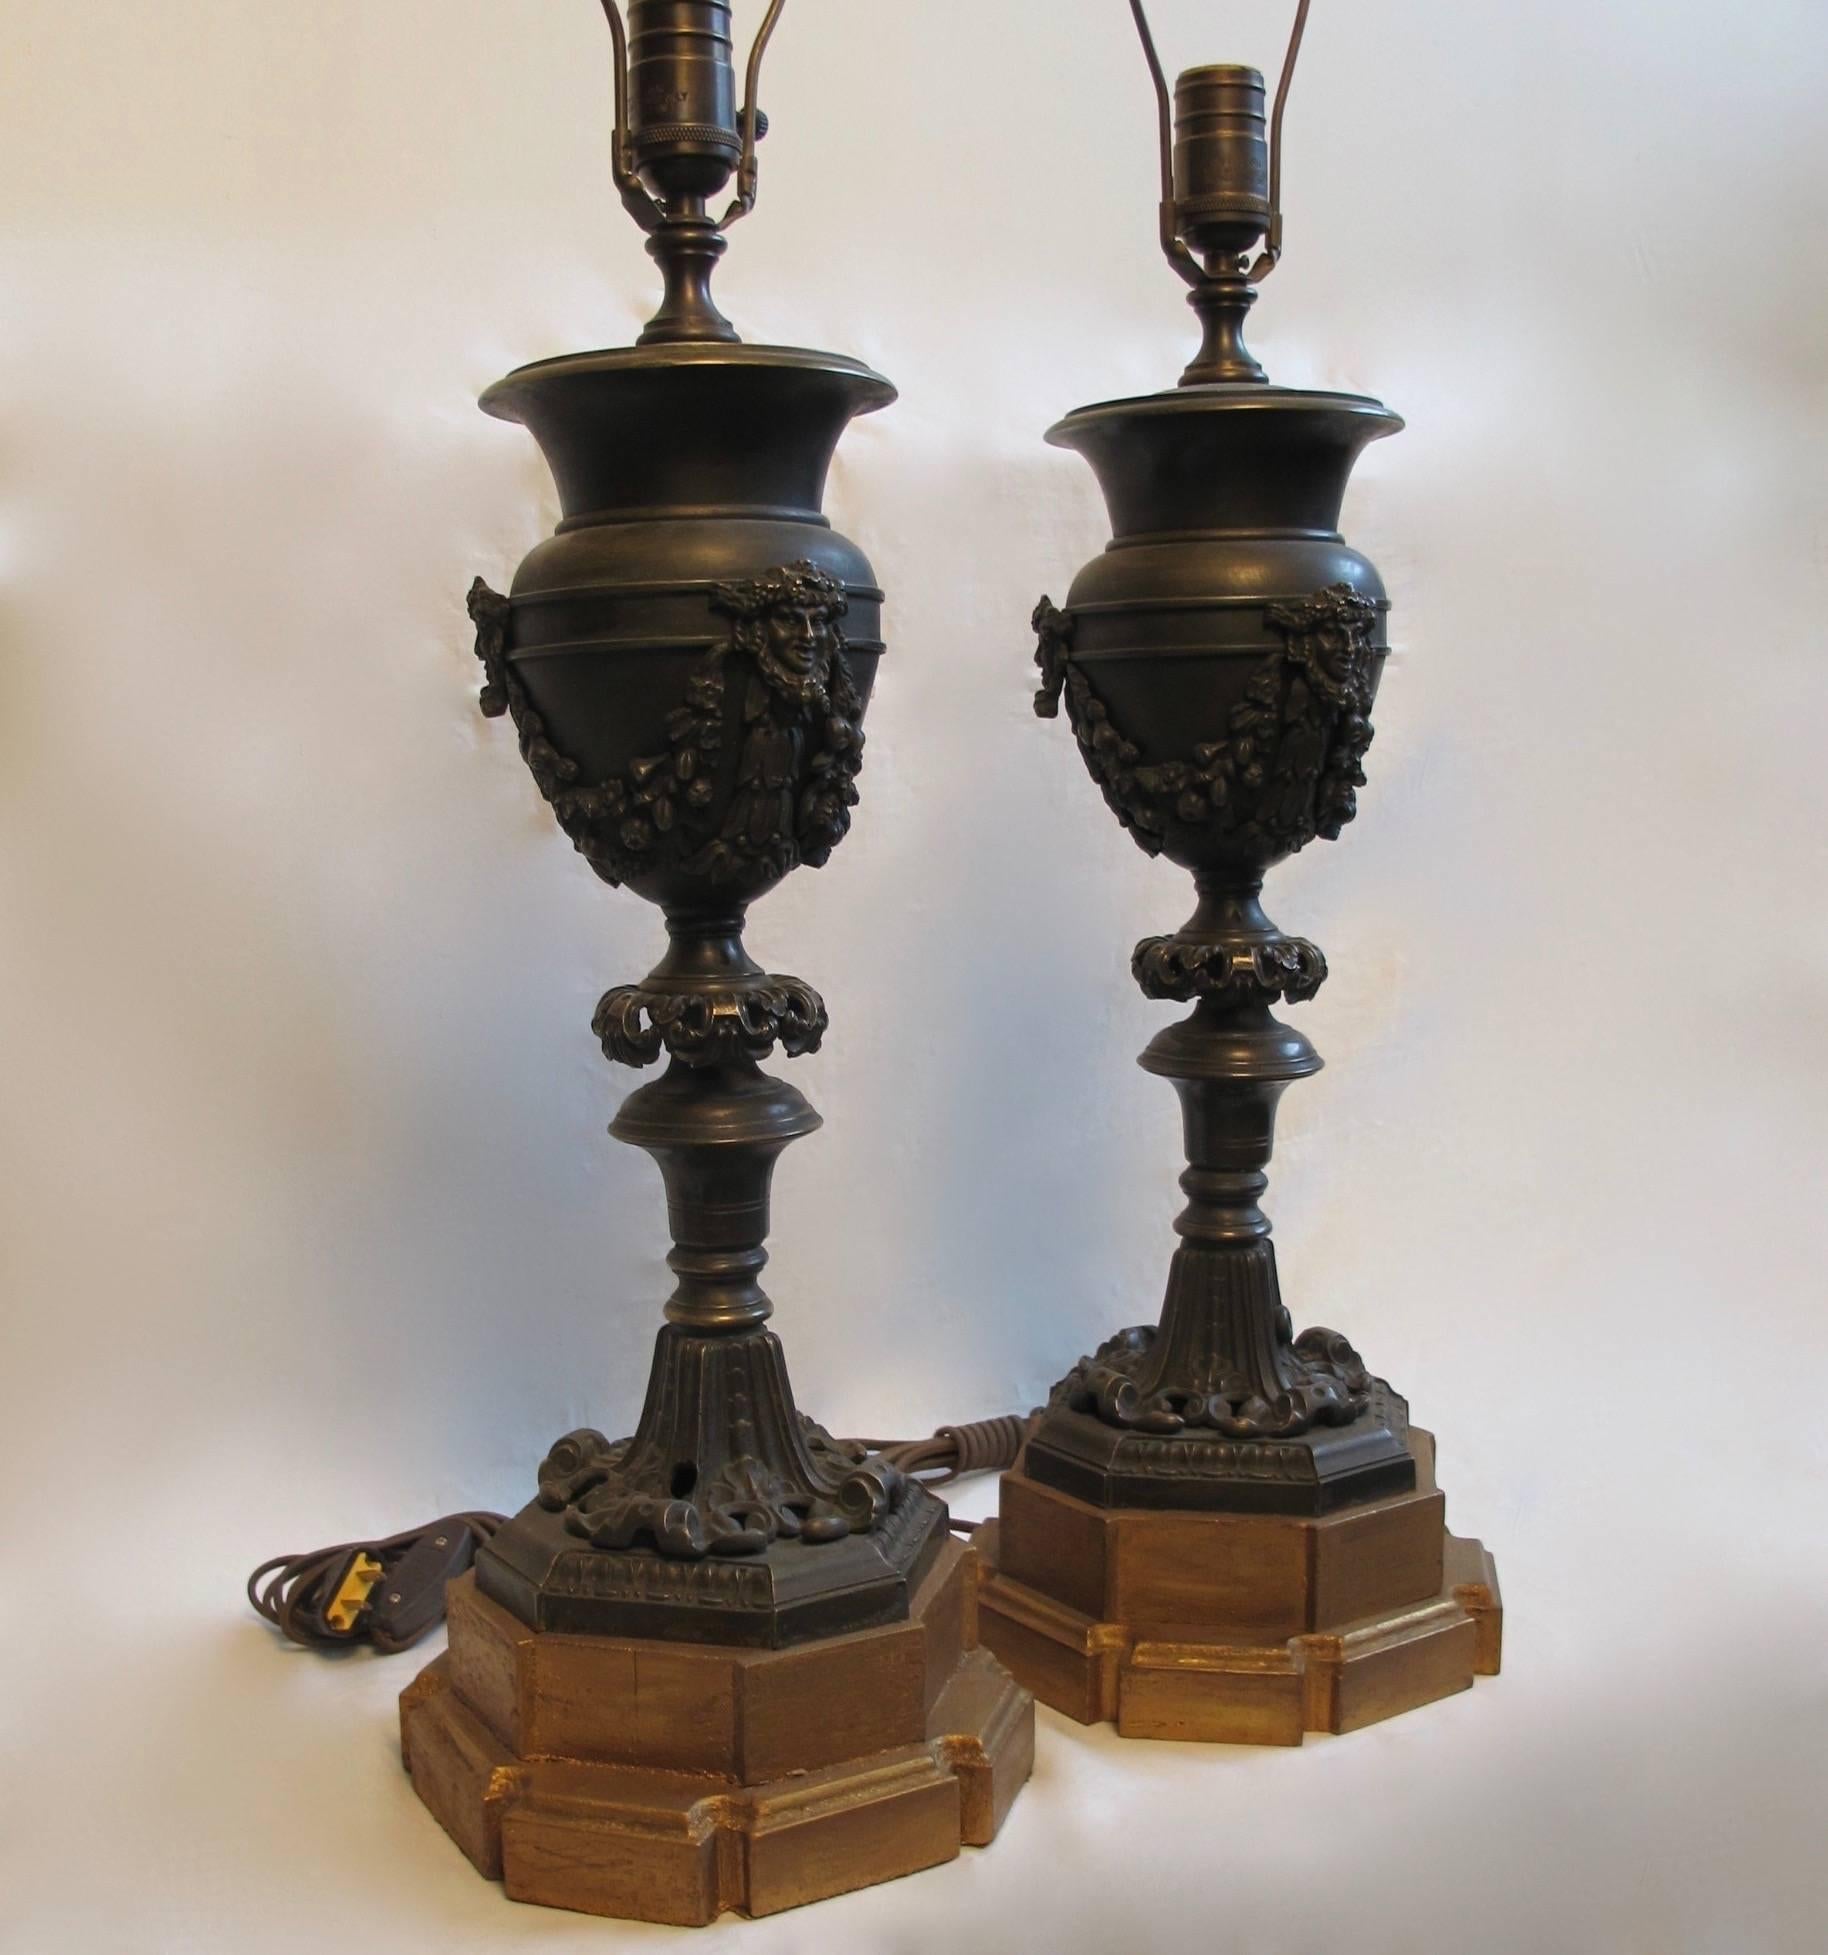 Fine quality bronze urns with masks and swags of fruit, now mounted and electrified as lamps. Continental, circa 1870.